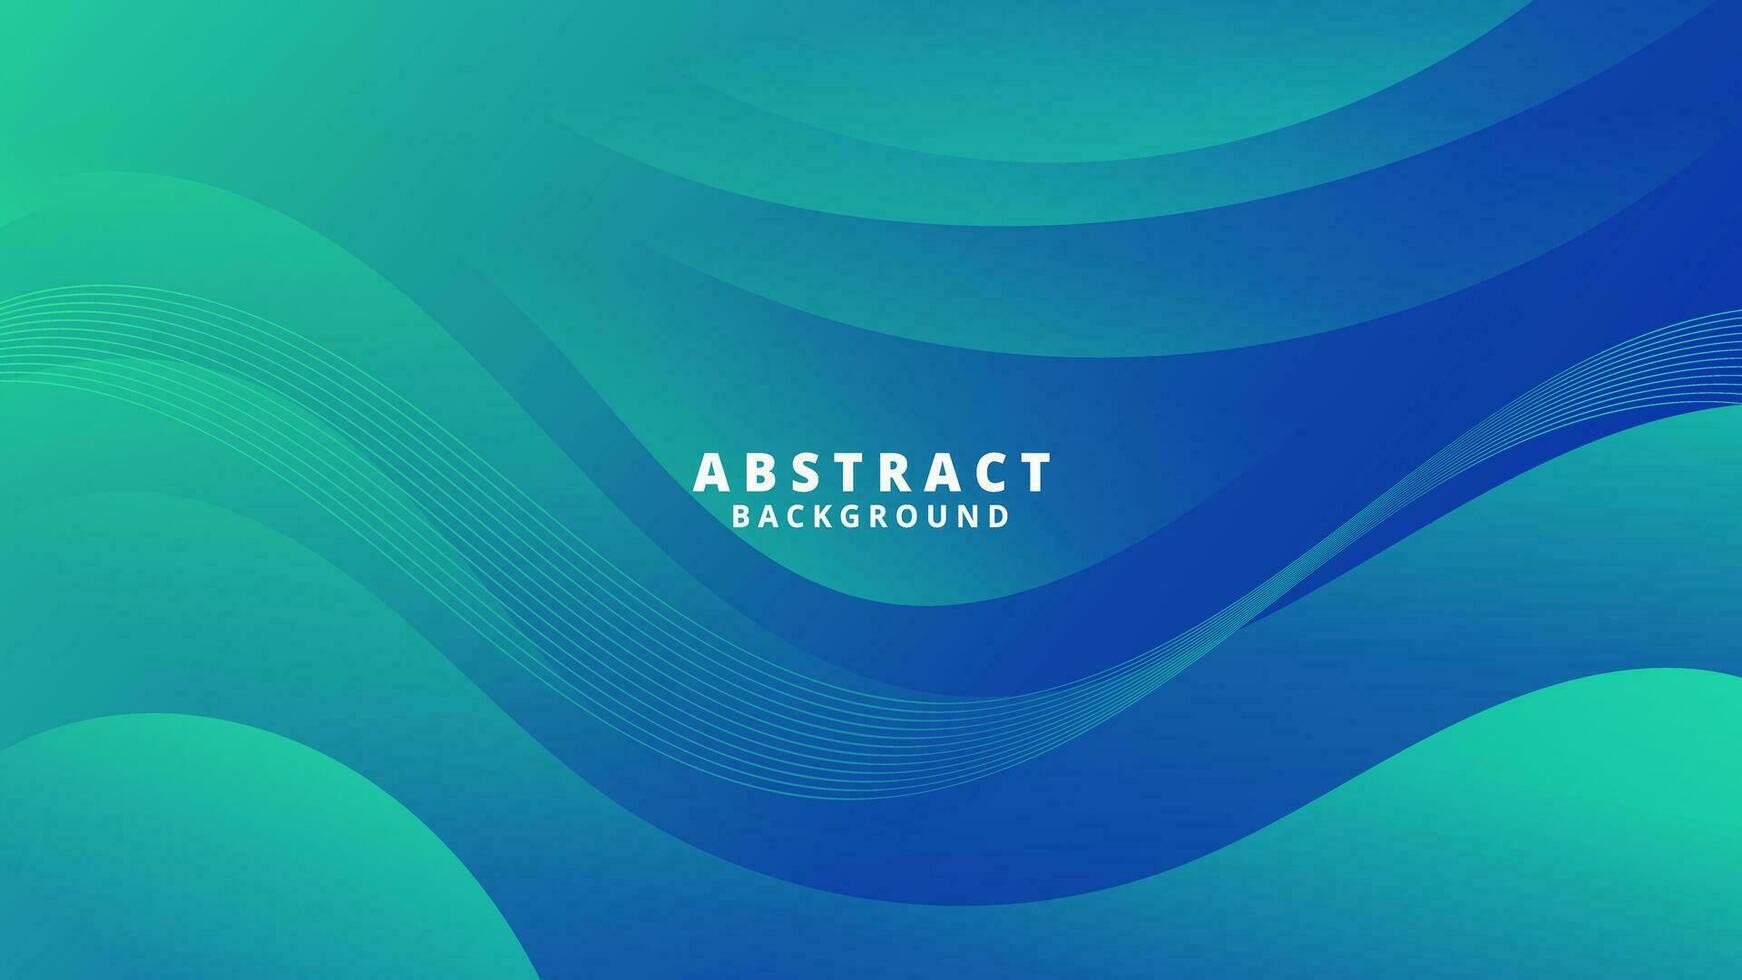 Abstract Gradient  Green Blue  liquid background. Modern  background design. Dynamic Waves. Fluid shapes composition.  Fit for website, banners, brochure, posters vector